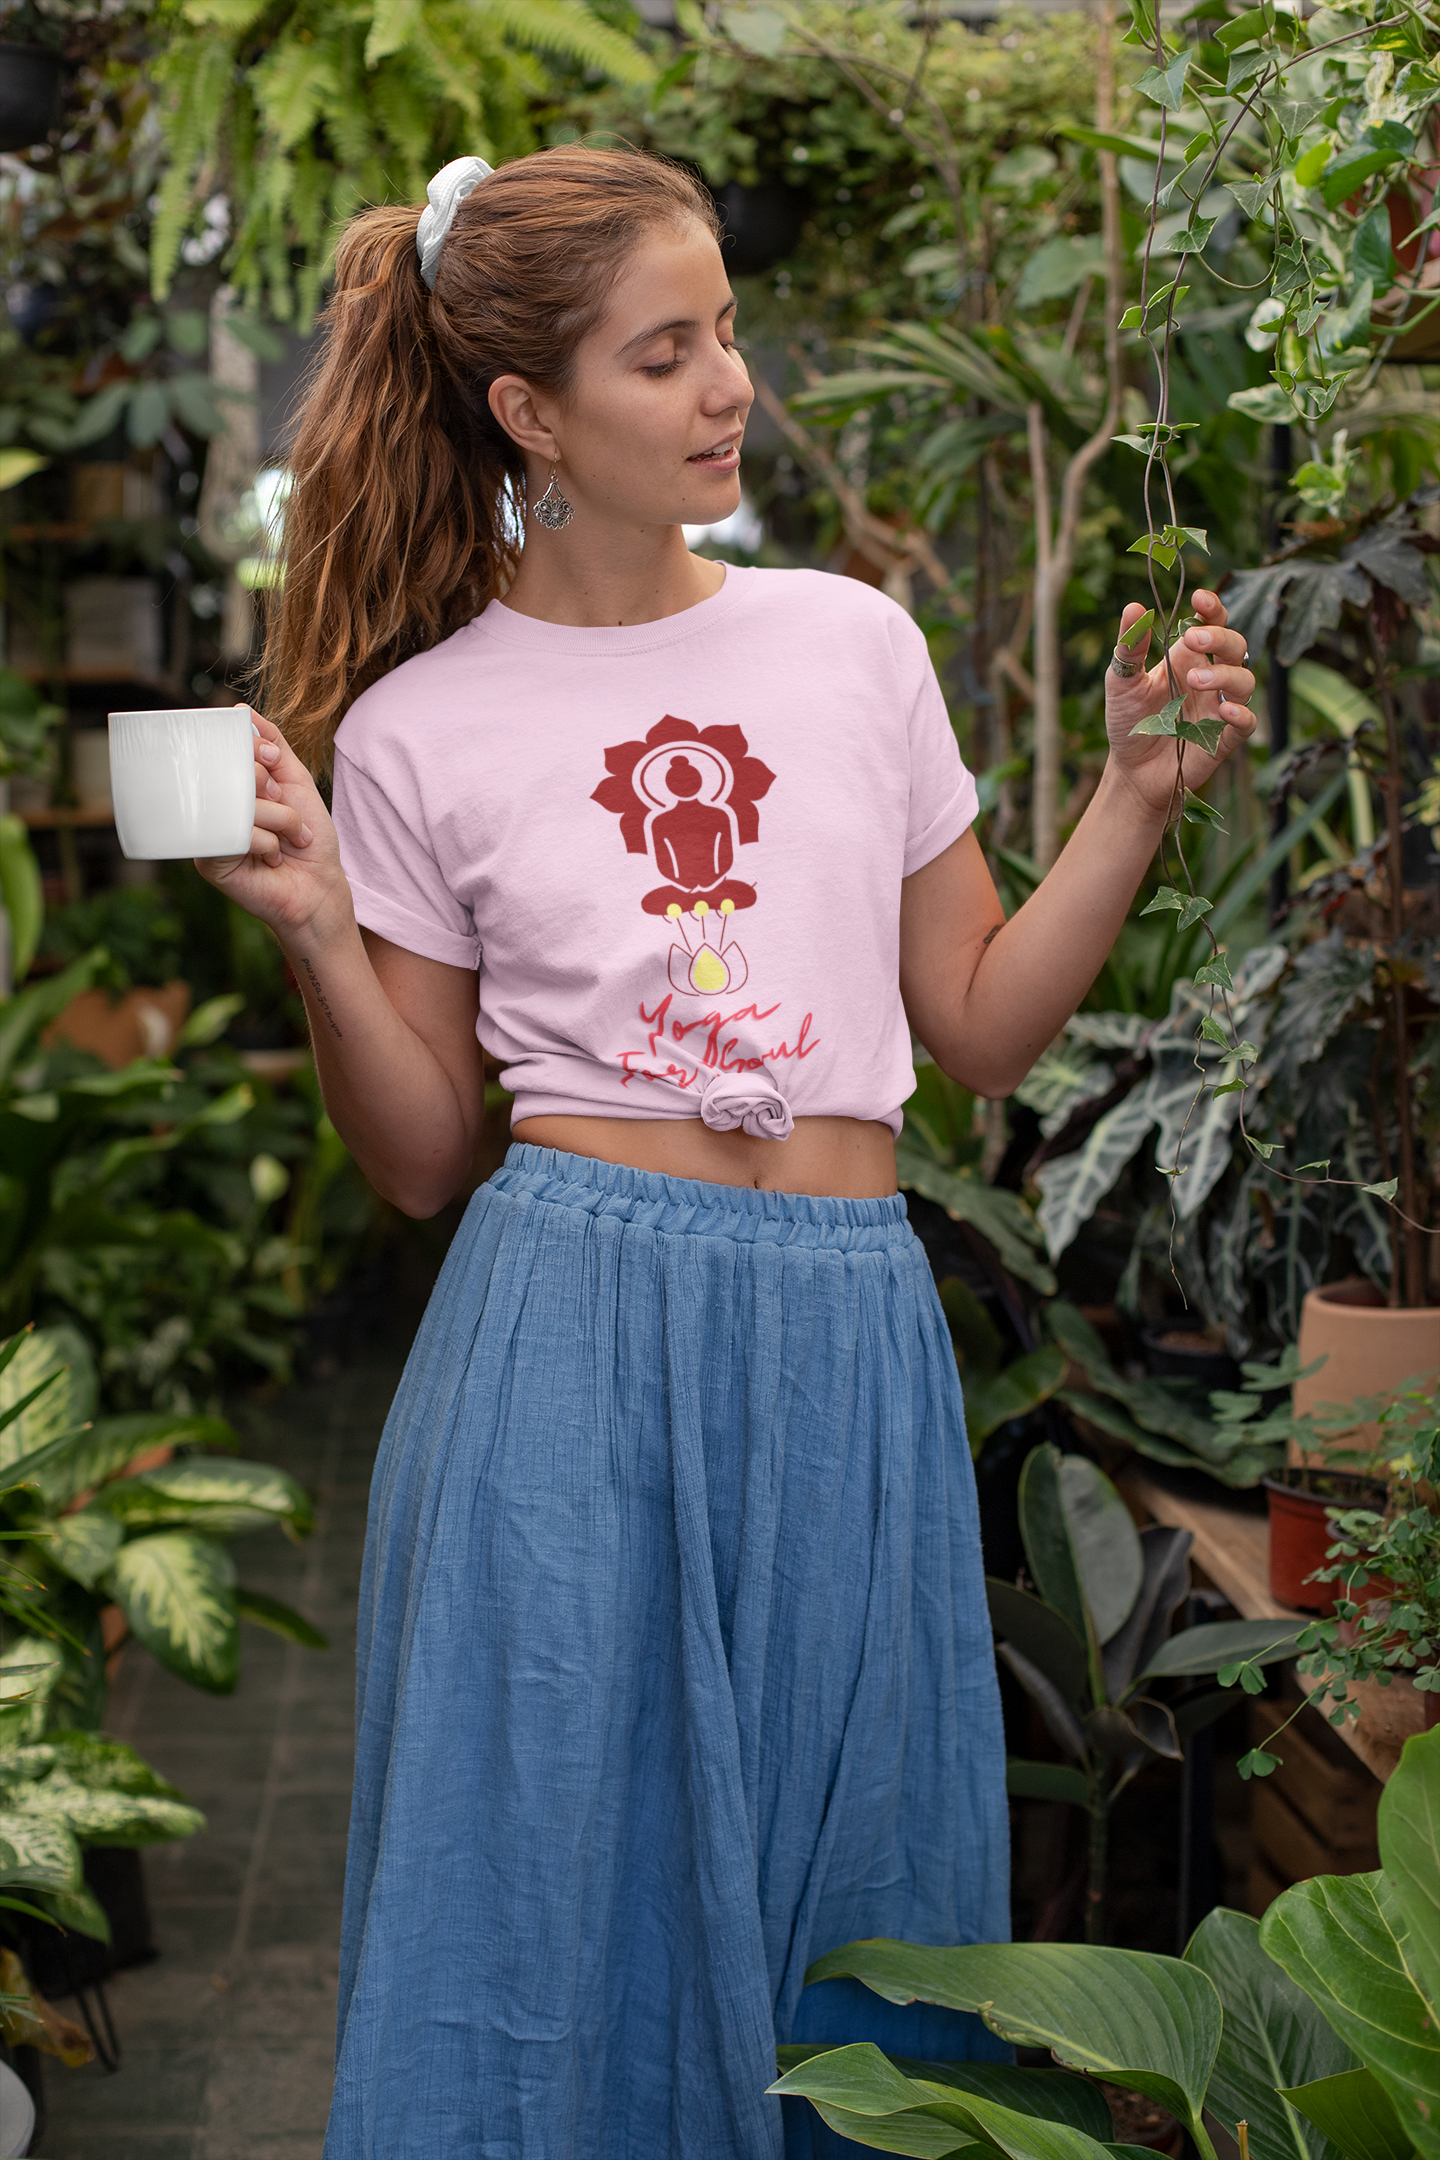 Yoga T-shirt For Women with Buddha Design Light Pink Color